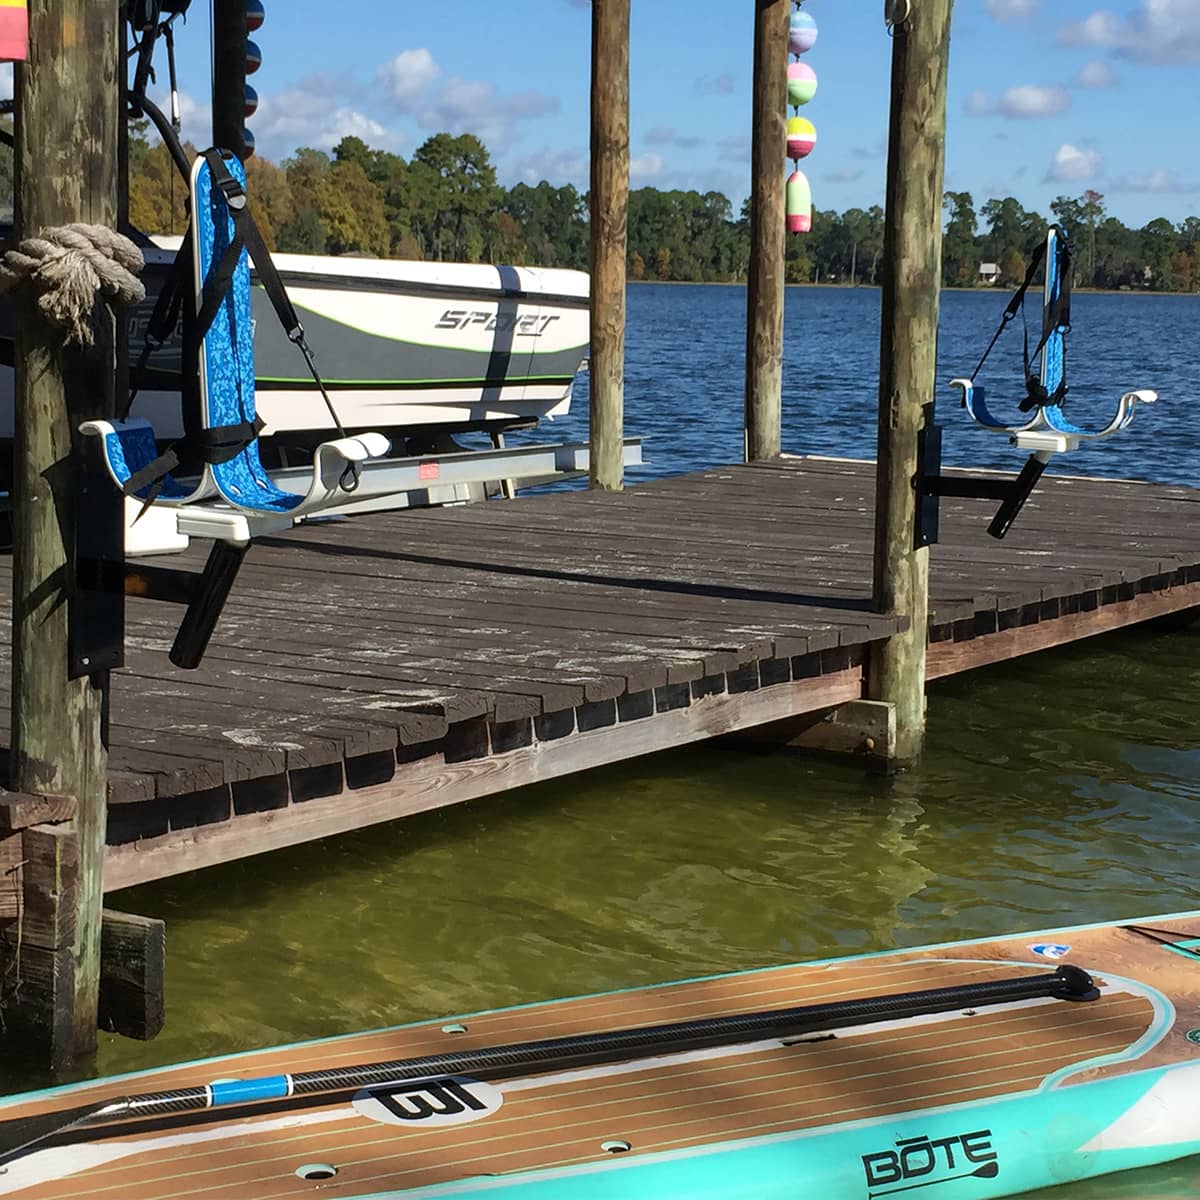 Installed mounts with S1 racks in the dock and a paddleboard in the water.